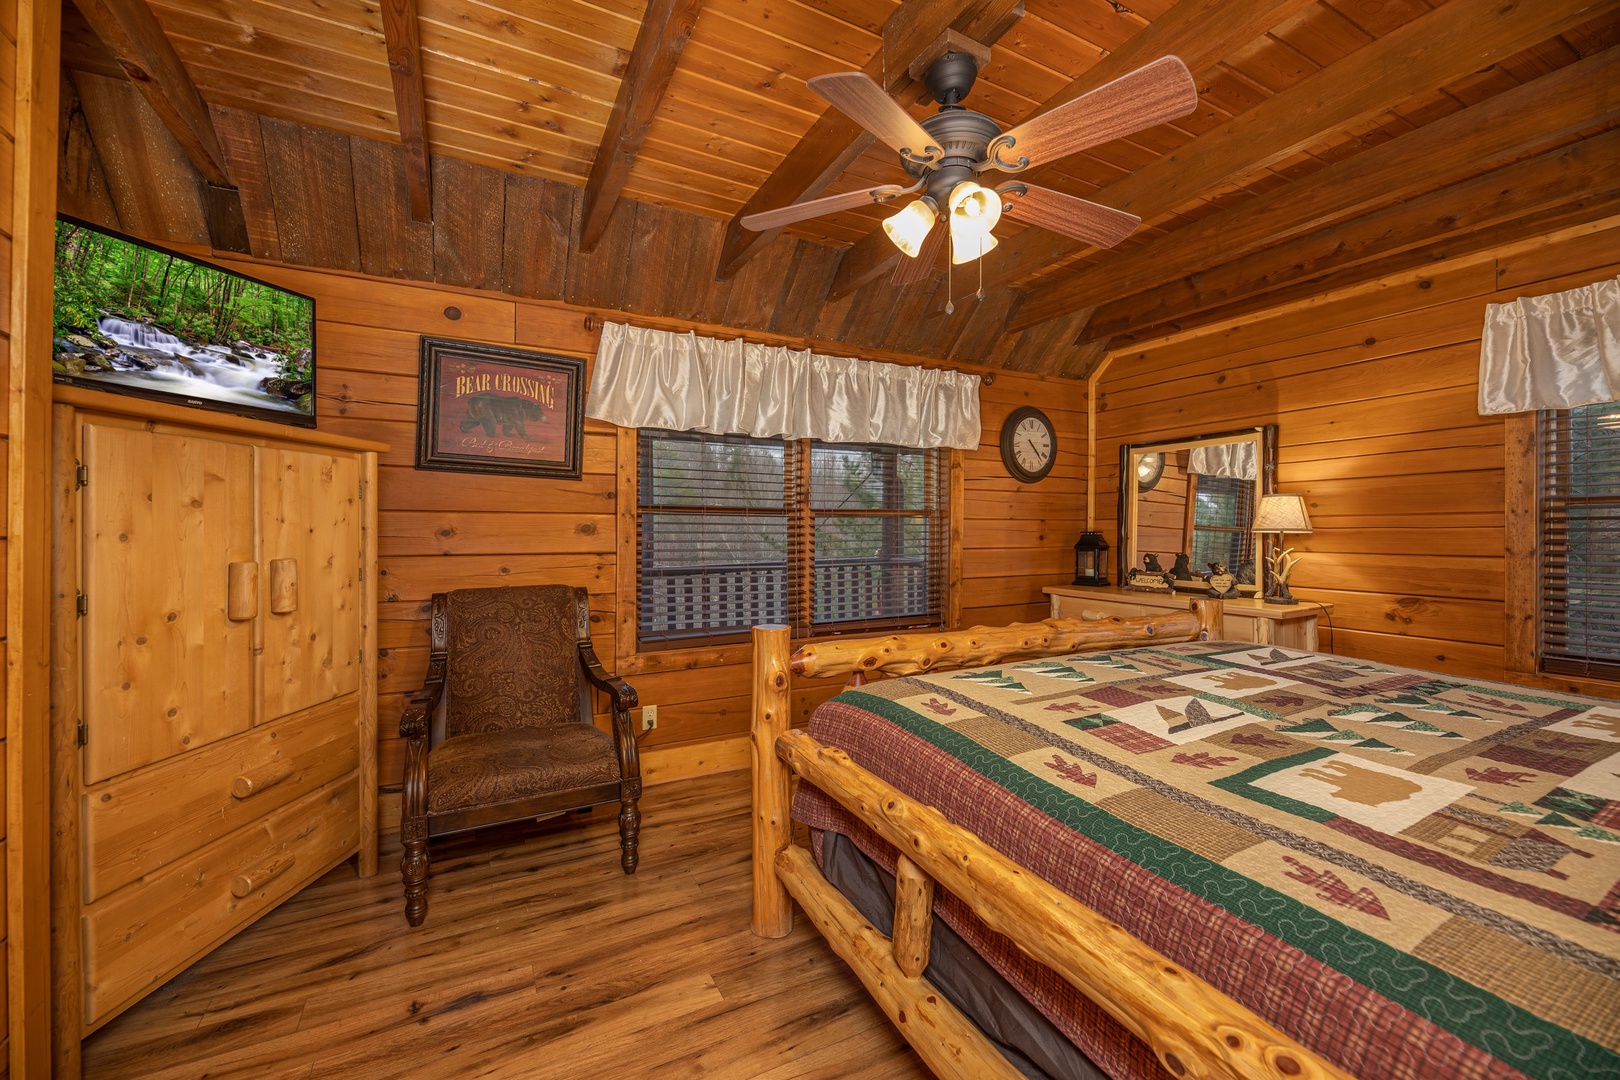 Armoire, TV, and chair in a bedroom at Pigeon Forge Pleasures, a 3 bedroom cabin rental located in Pigeon Forge